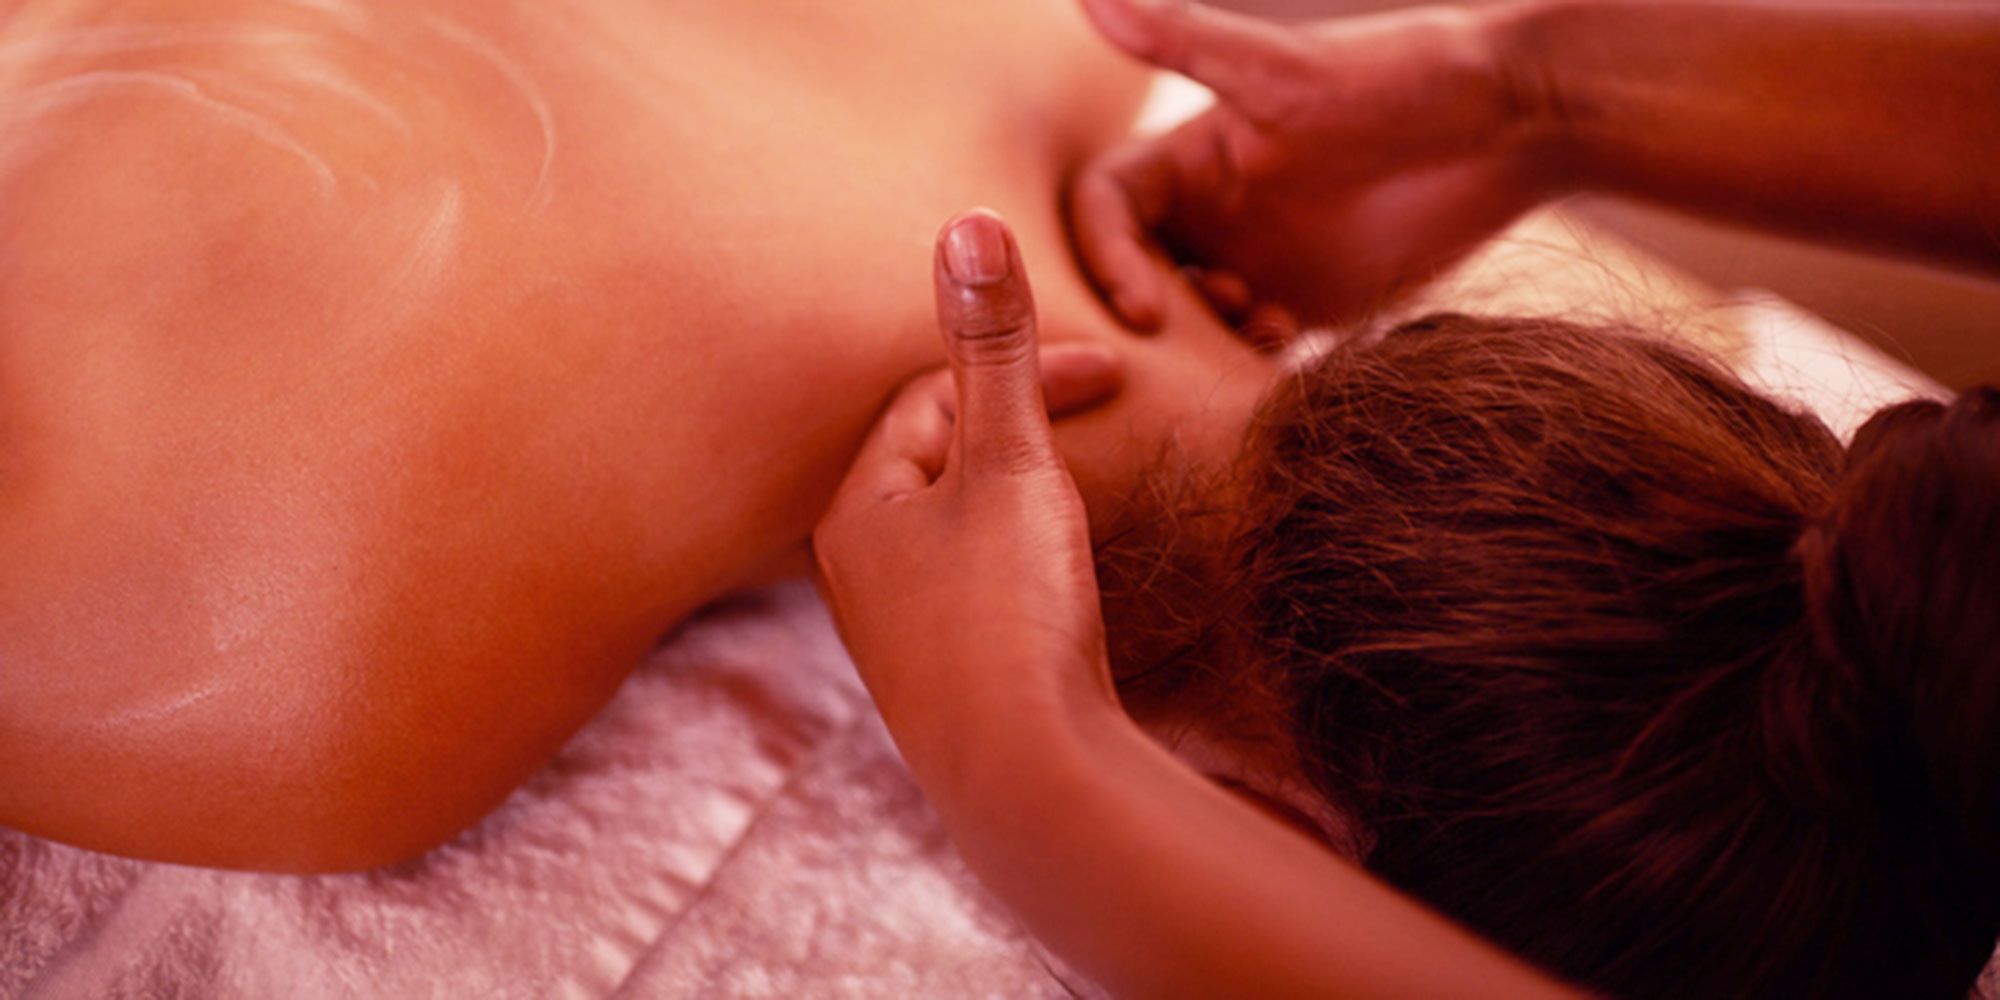 Orgasmic massage stories from women who pay a stranger image picture